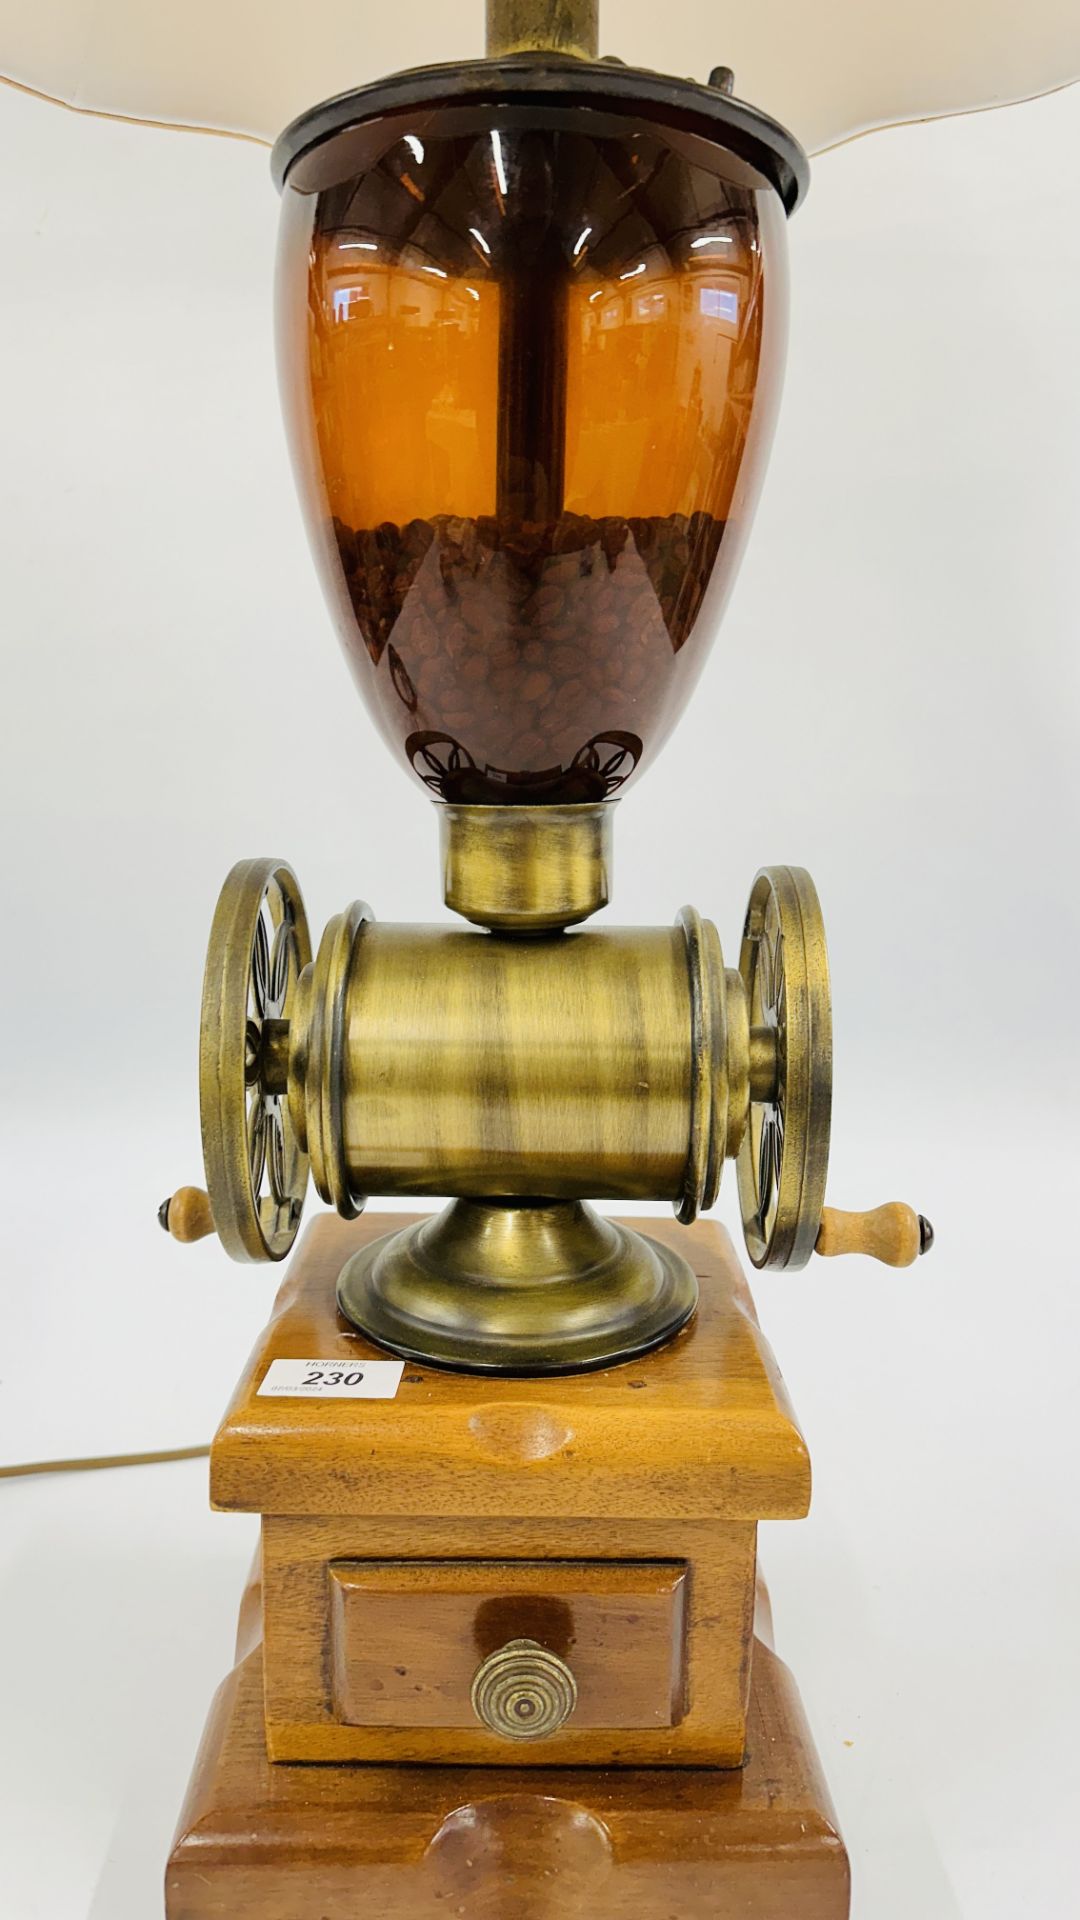 A VINTAGE NOVELTY CONVERTED TABLE LAMP IN THE FORM OF A COFFEE GRINDER WITH SHADE - SOLD AS SEEN. - Image 2 of 5